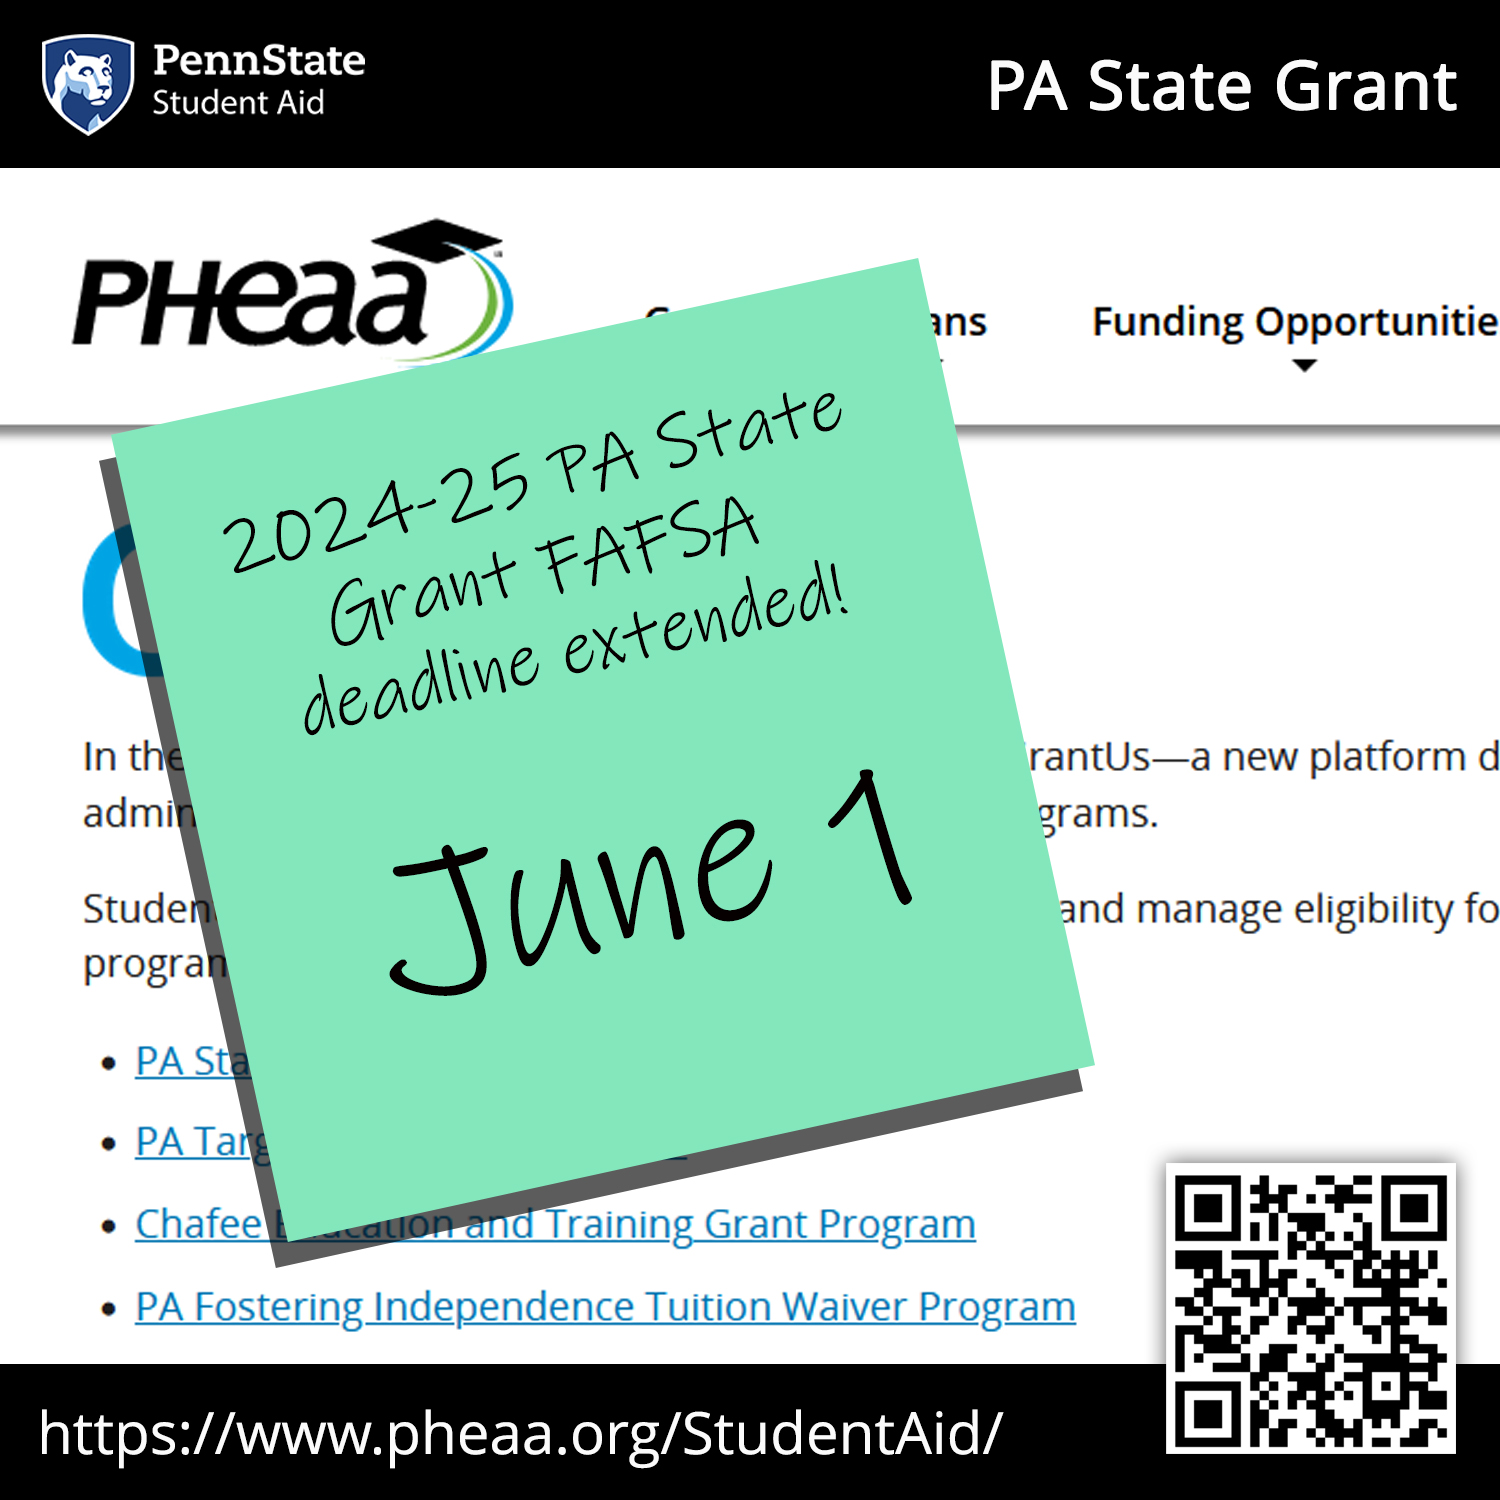 PHEAA GrantUS website and sticky note.